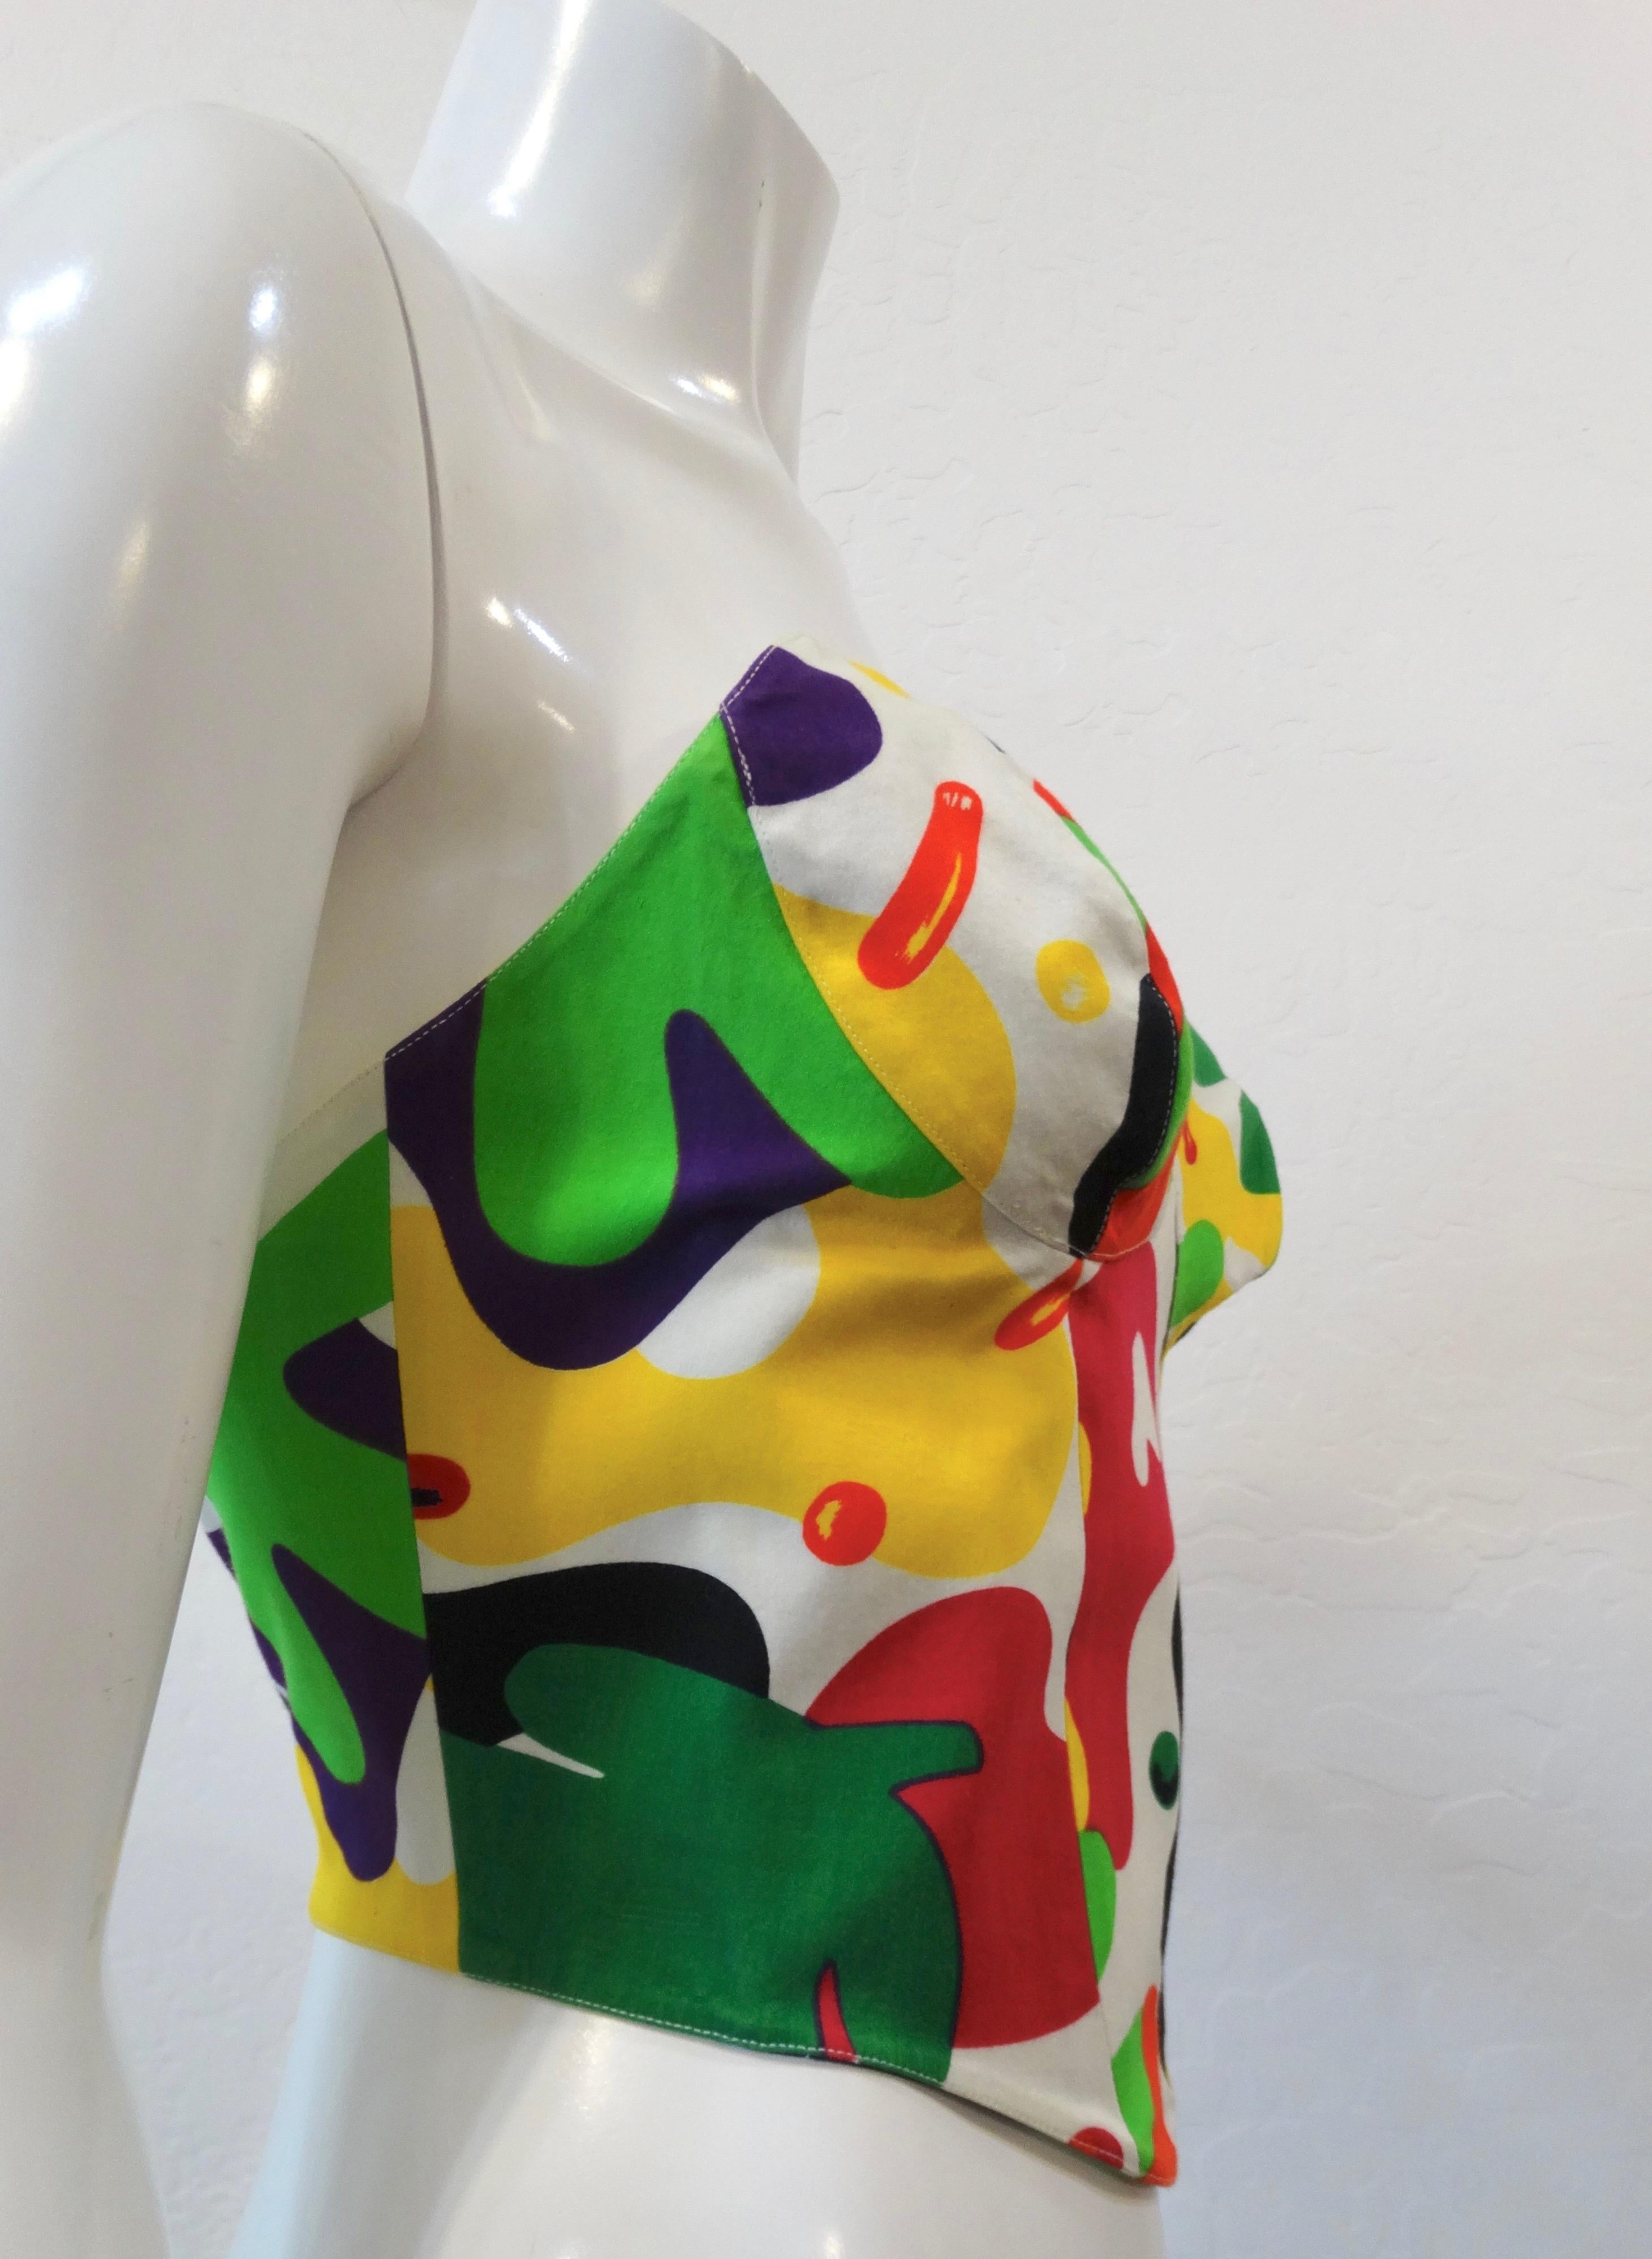 Score yourself a piece of golden-era 1980s Thierry Mugler with our abstract printed bustier! Ultra-feminine femmebot silhouette with bright bold rainbow pattern. Hook and eye closures up the back. Pairs perfectly with your favorite Mugler suit set